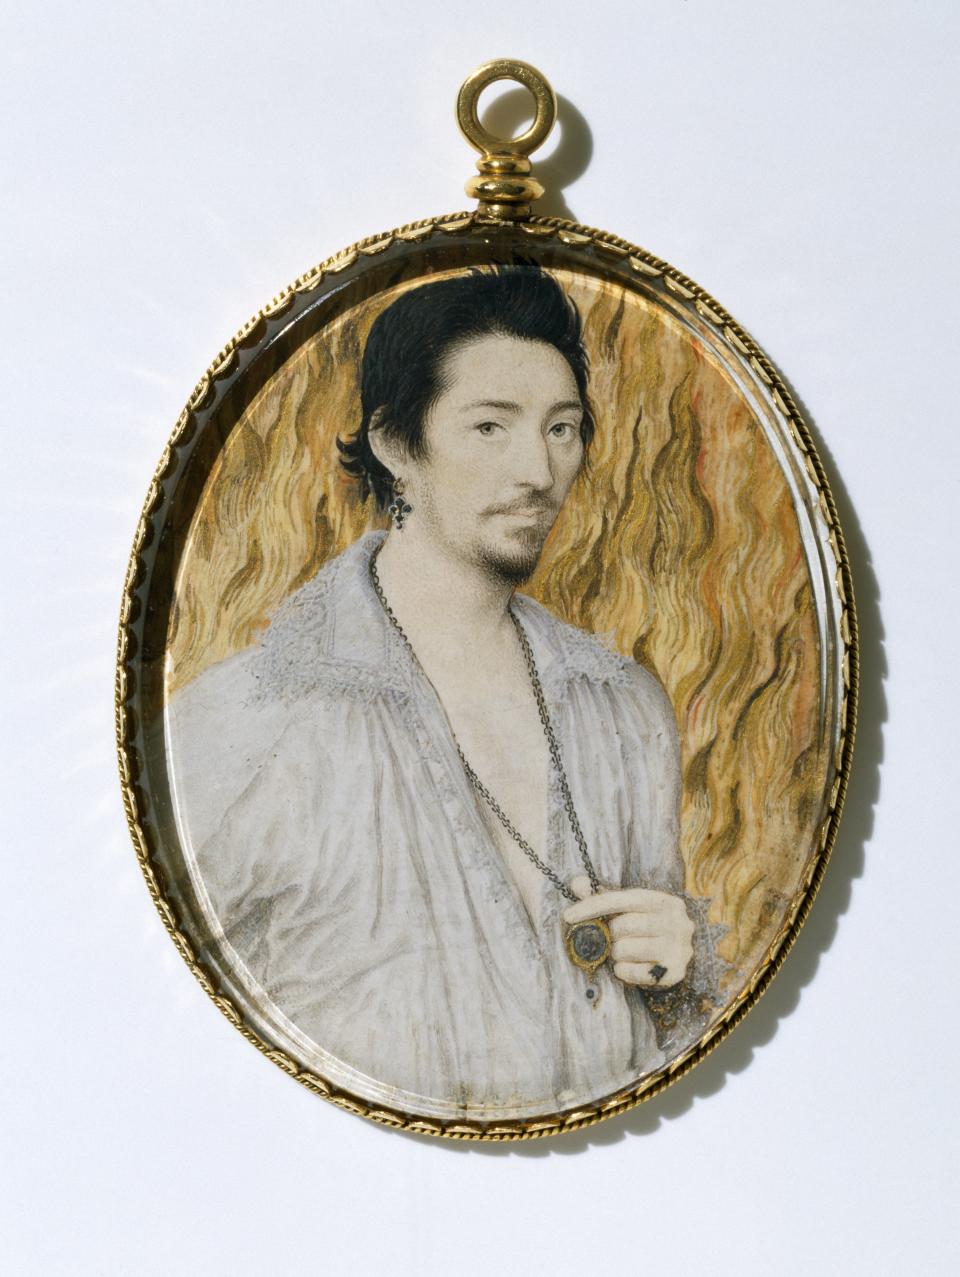 Nicholas Hilliard
An Unknown Man
England, c. 1600
Miniature: watercolour on vellum on card
6.6 x 5.15 cm
Victoria and Albert Museum, P.5-1917
Purchased with the assistance of the Murray Bequest
